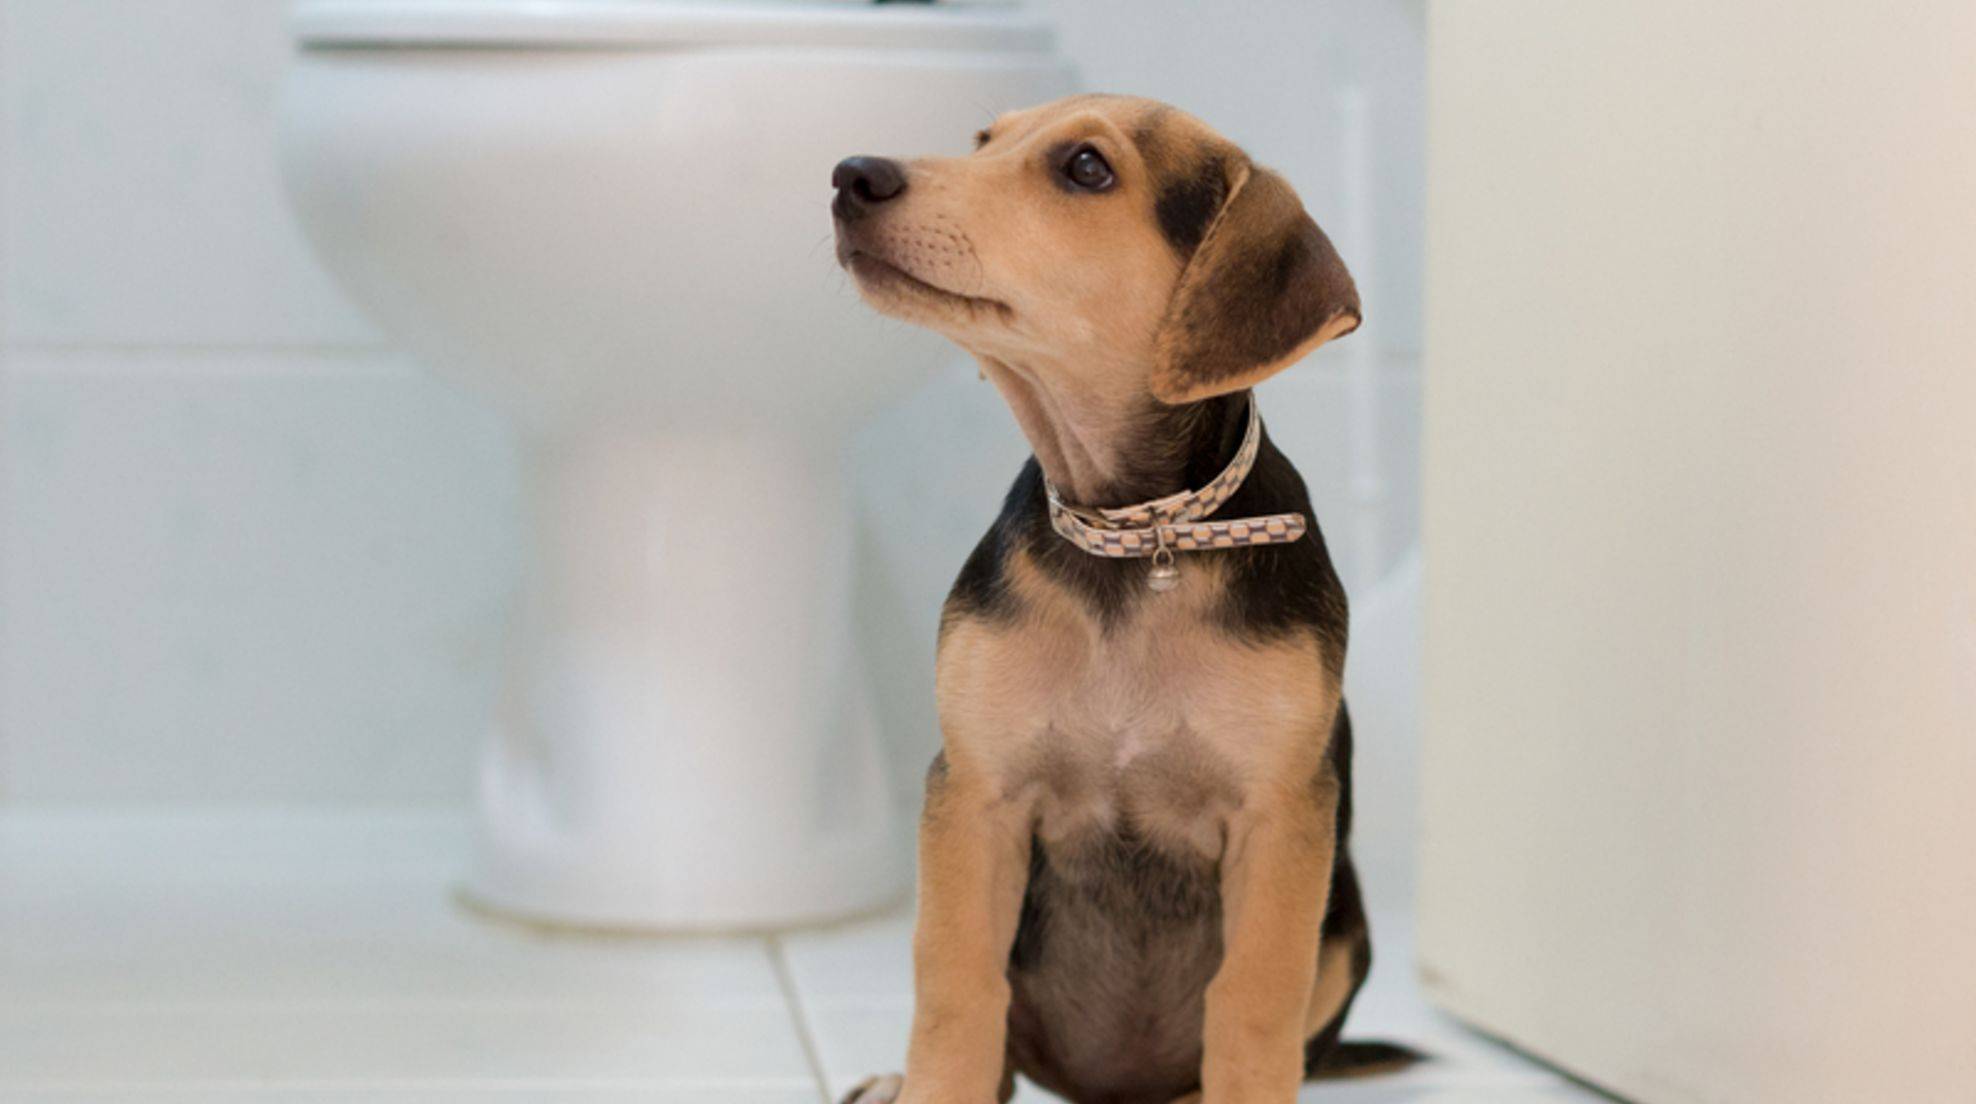 Dog drinking from the toilet: Is it dangerous?